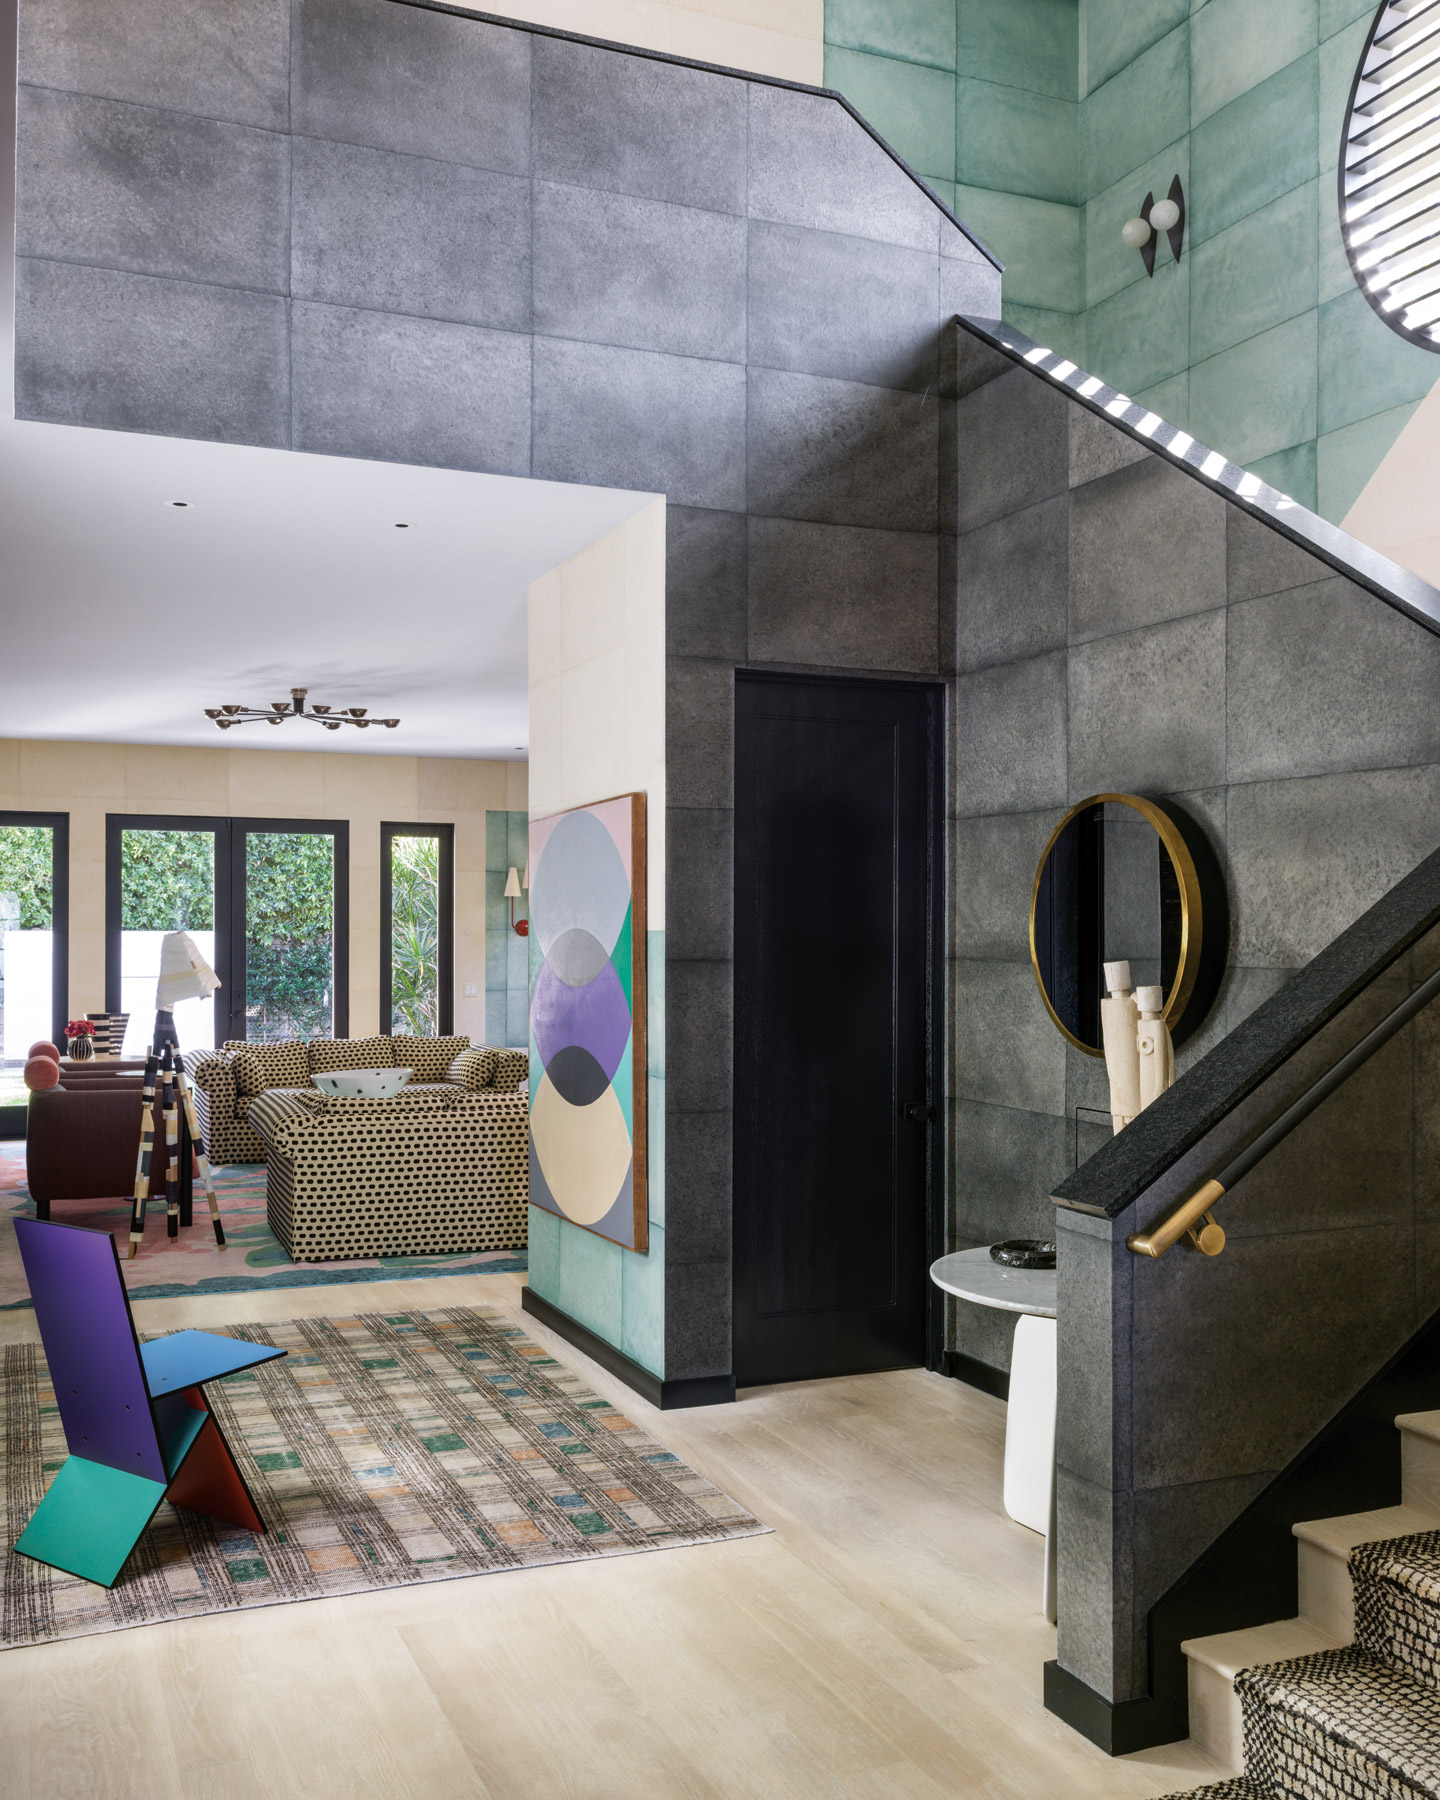 Celebrity designer Kelly Wearstler transforms this West Hollywood home into punk perfection